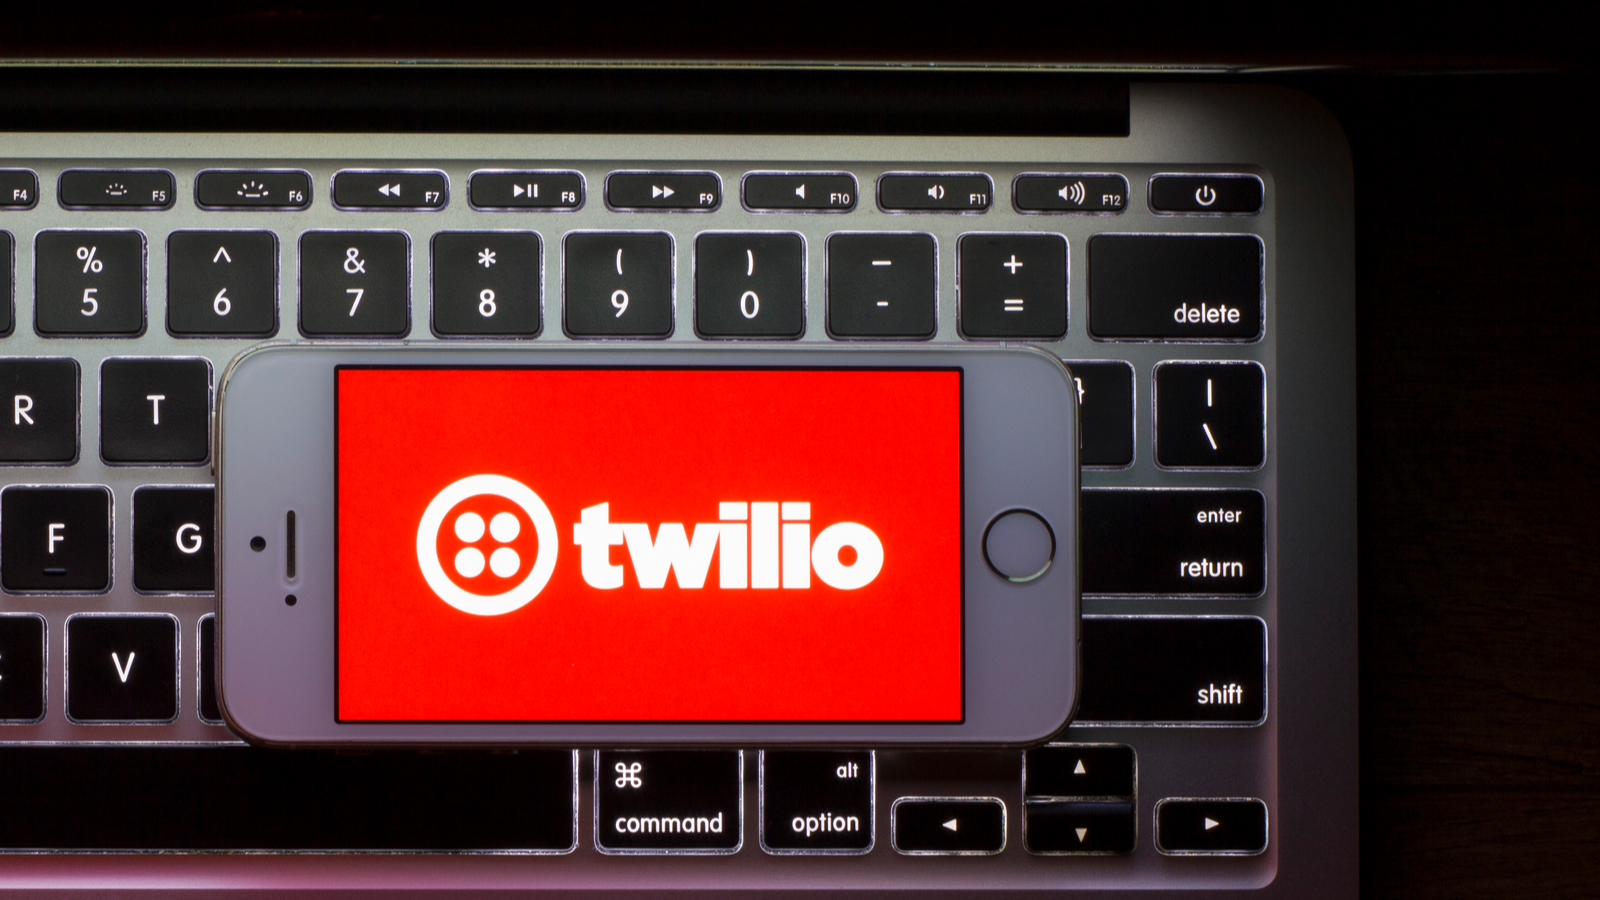 Twilio Layoffs 2023. The Twilio logo is seen on a smartphone. Twilio is a cloud communications platform as a service company based in San Francisco, California. TWLO stock.